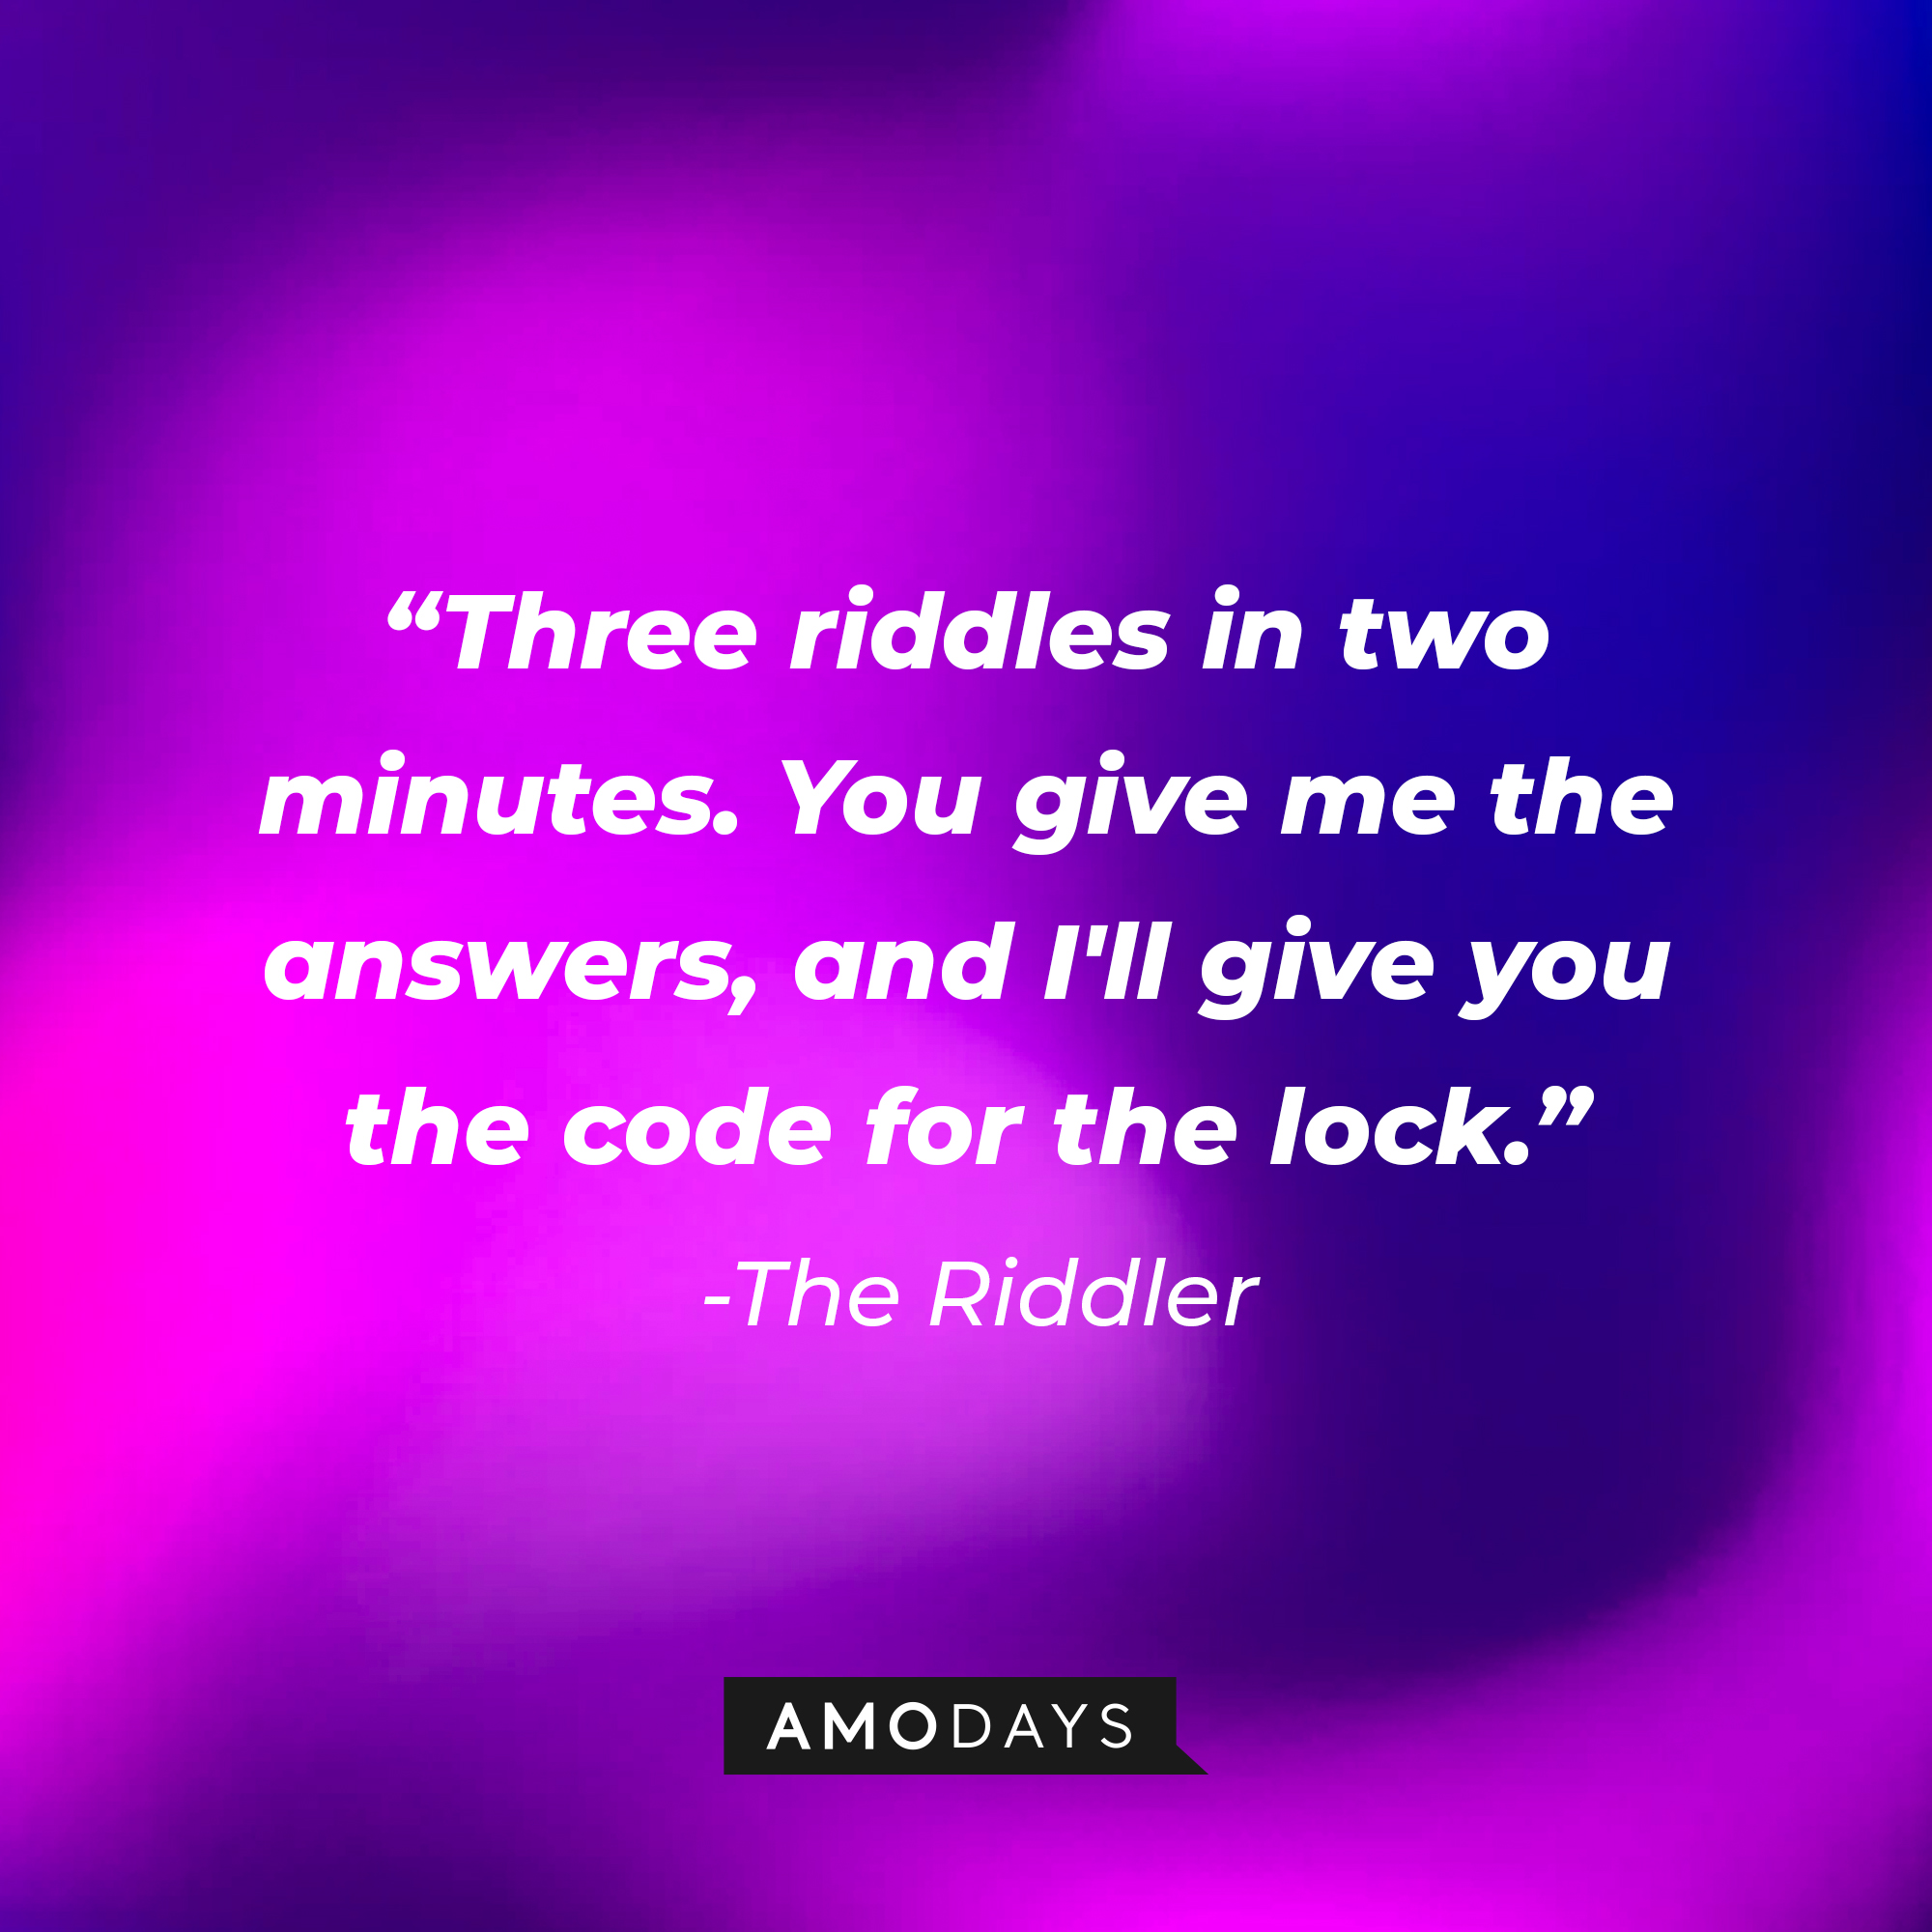 The Riddler's quote: “Three riddles in two minutes. You give me the answers, and I'll give you the code for the lock.” | Amodays